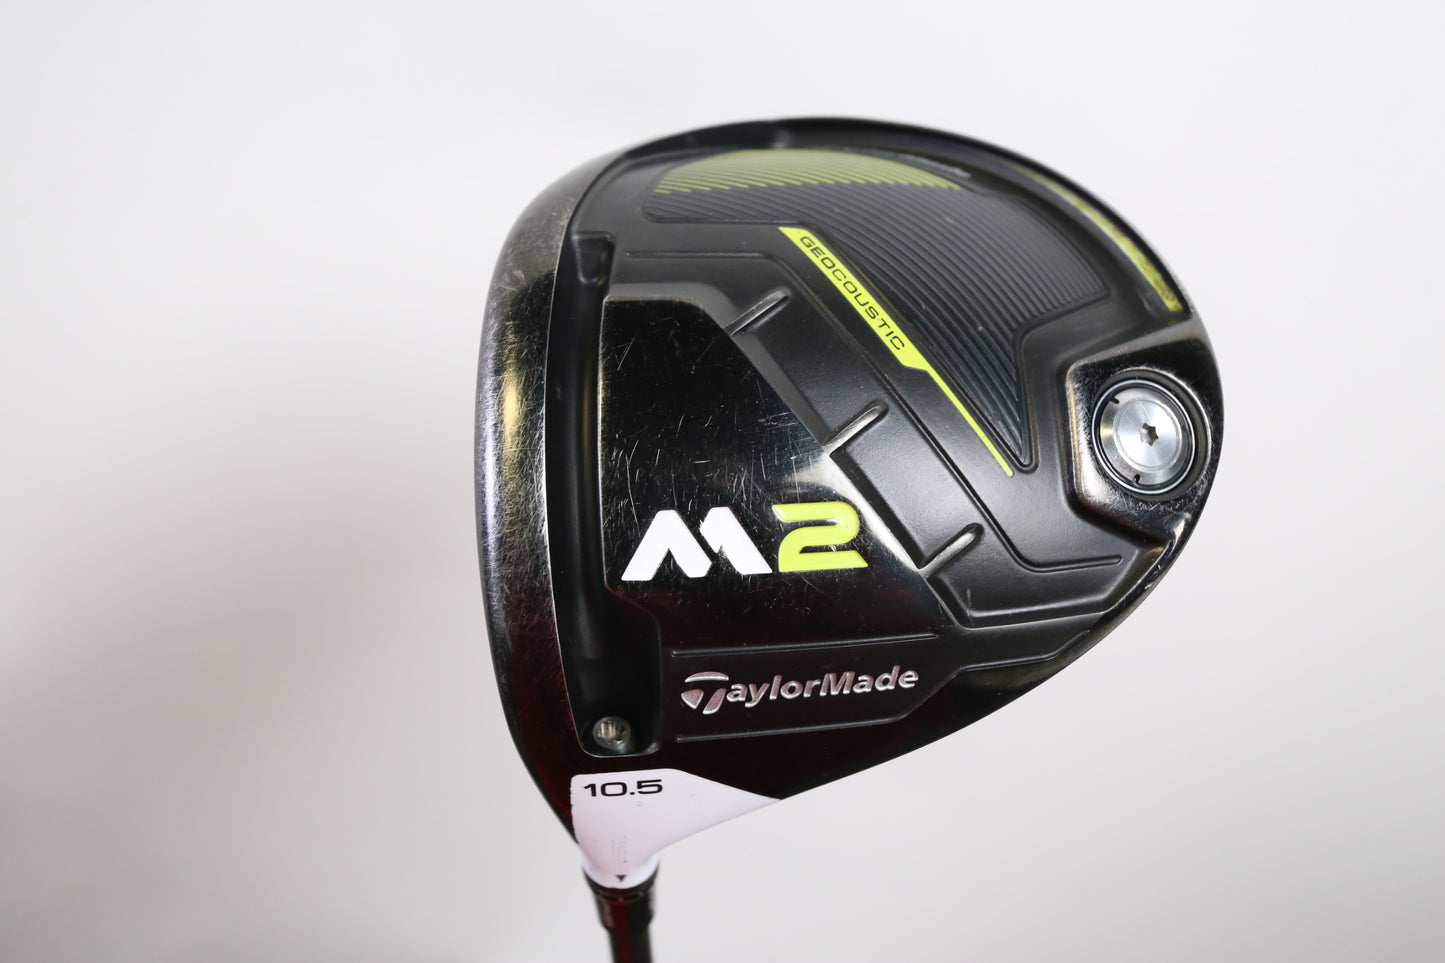 Used TaylorMade M2 2017 Driver - Left-Handed - 10.5 Degrees - Stiff Flex